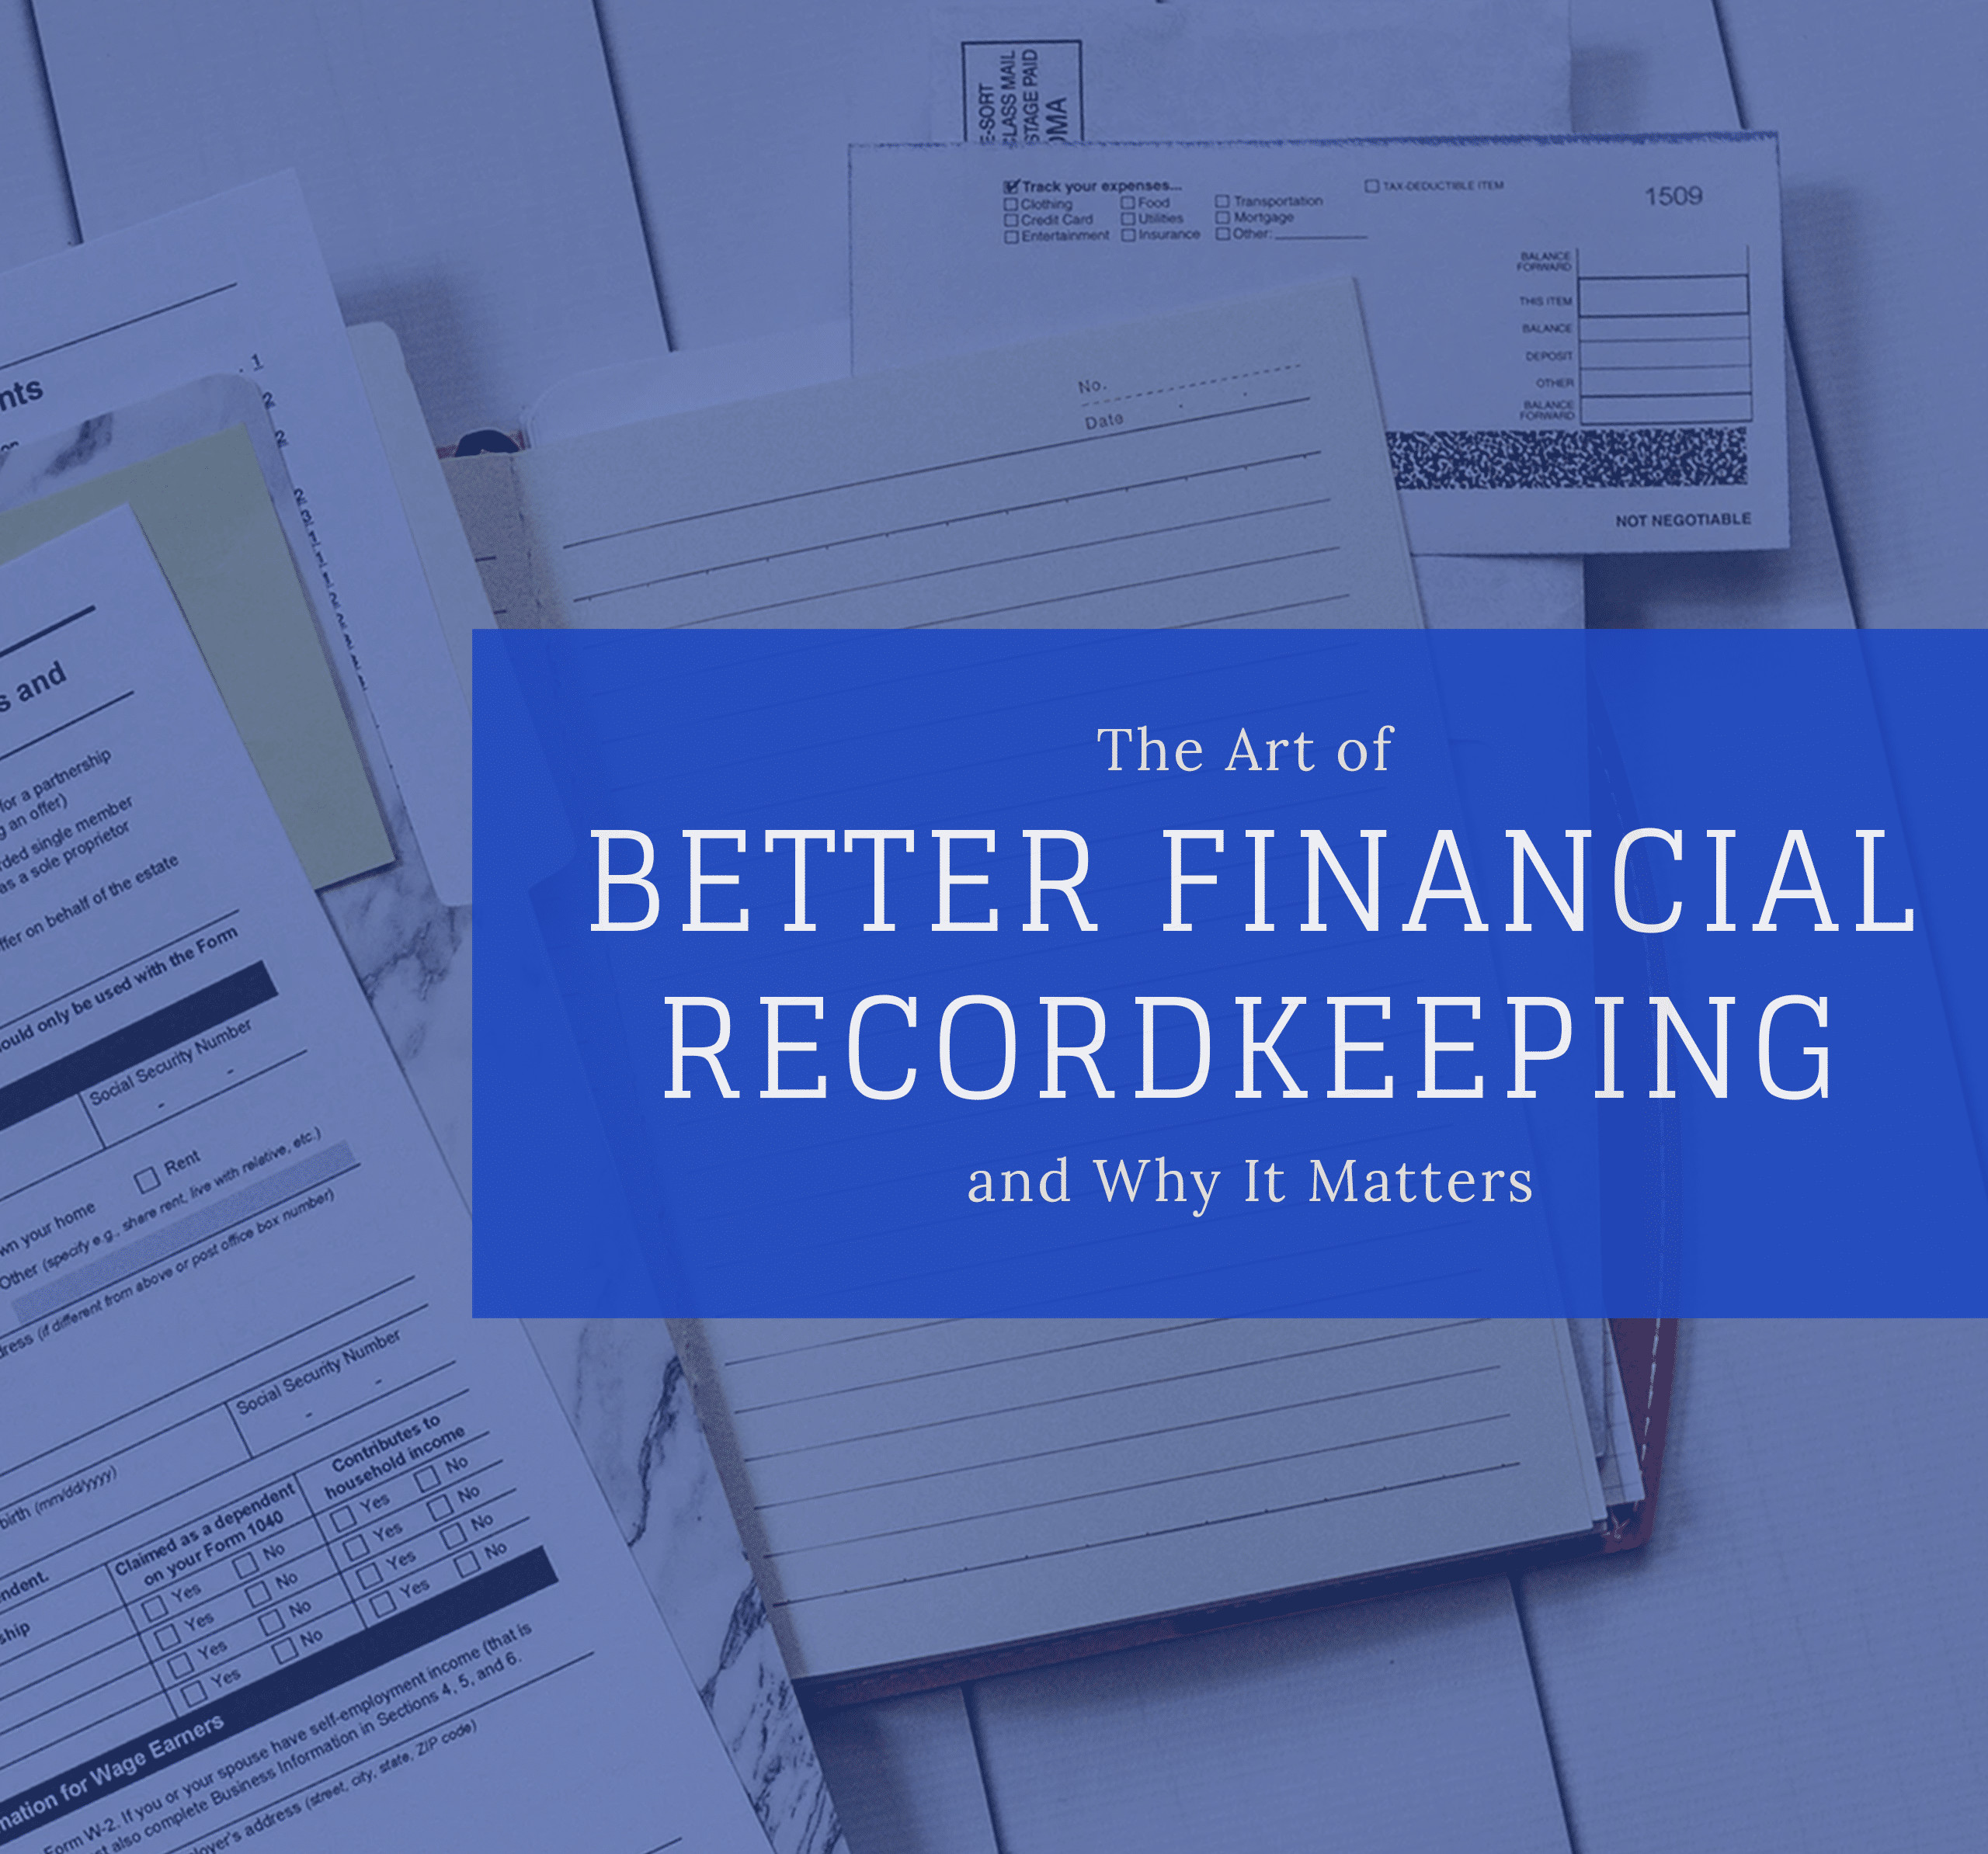 The Art of Better Financial Recordkeeping & Why It Matters